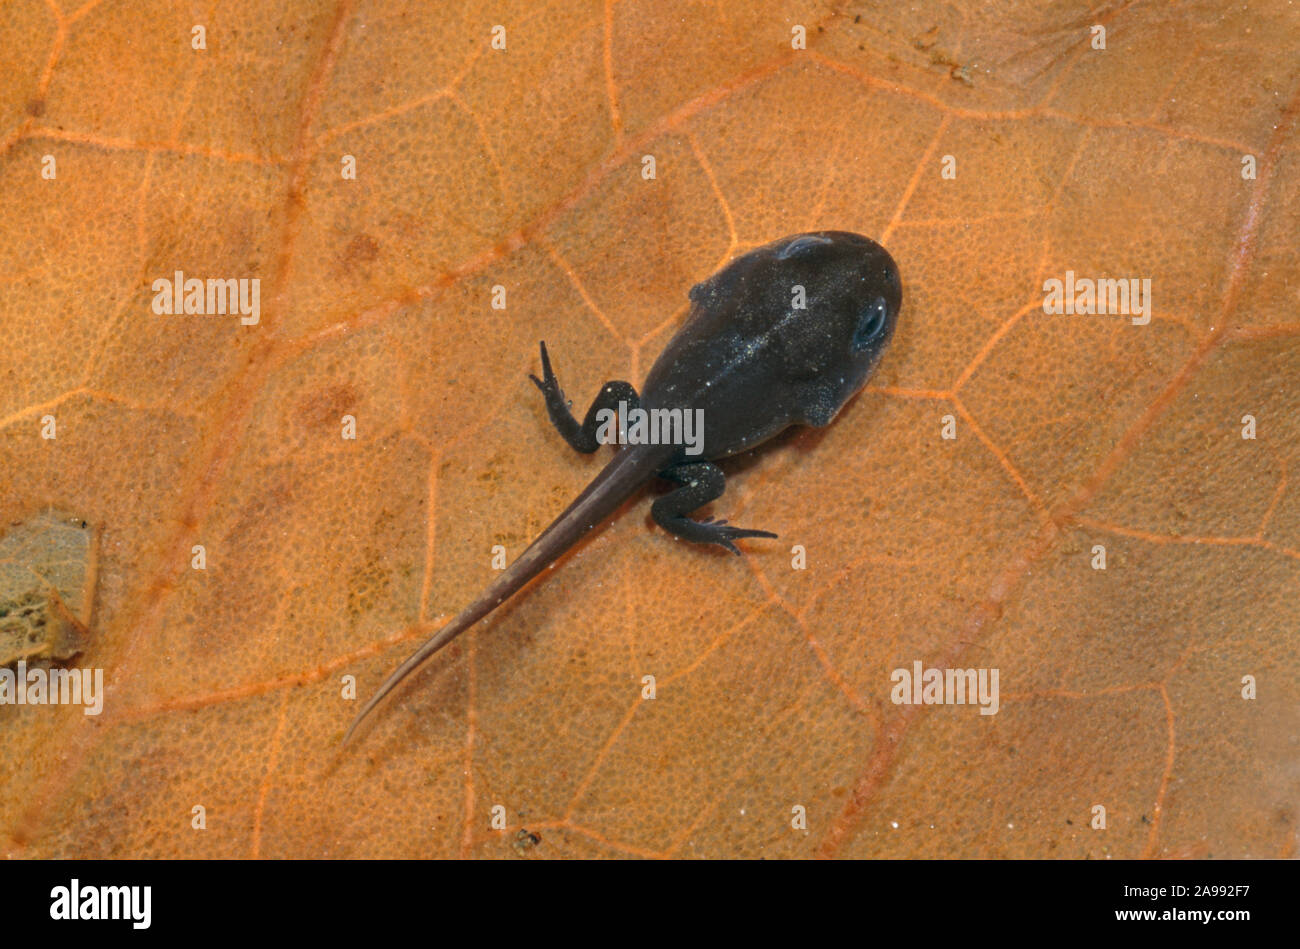 NATTERJACK TOAD young tadpole. Epidalea (Bufo) calamita, rear legs in place, front legs yet to emerge. Dorsal stripe beginning to appear. Stock Photo